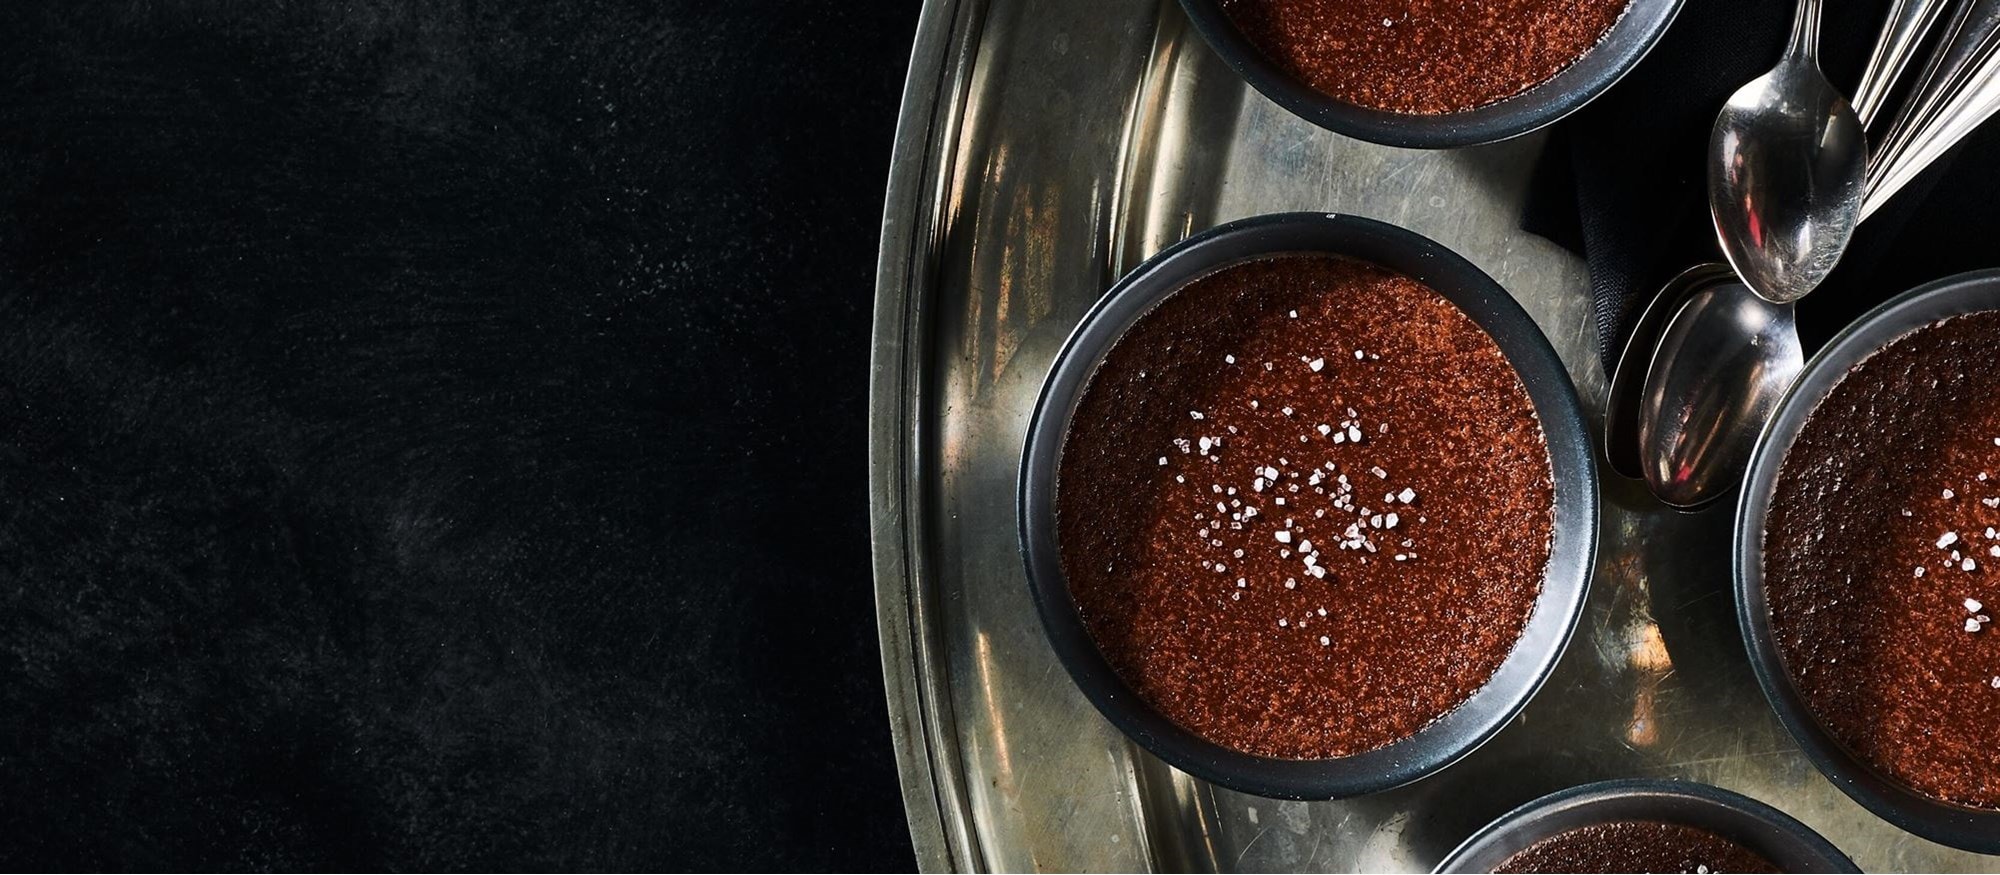 Easy and delicious Chocolate Pot de Crème recipe using the Bake mode setting of your Wolf Oven